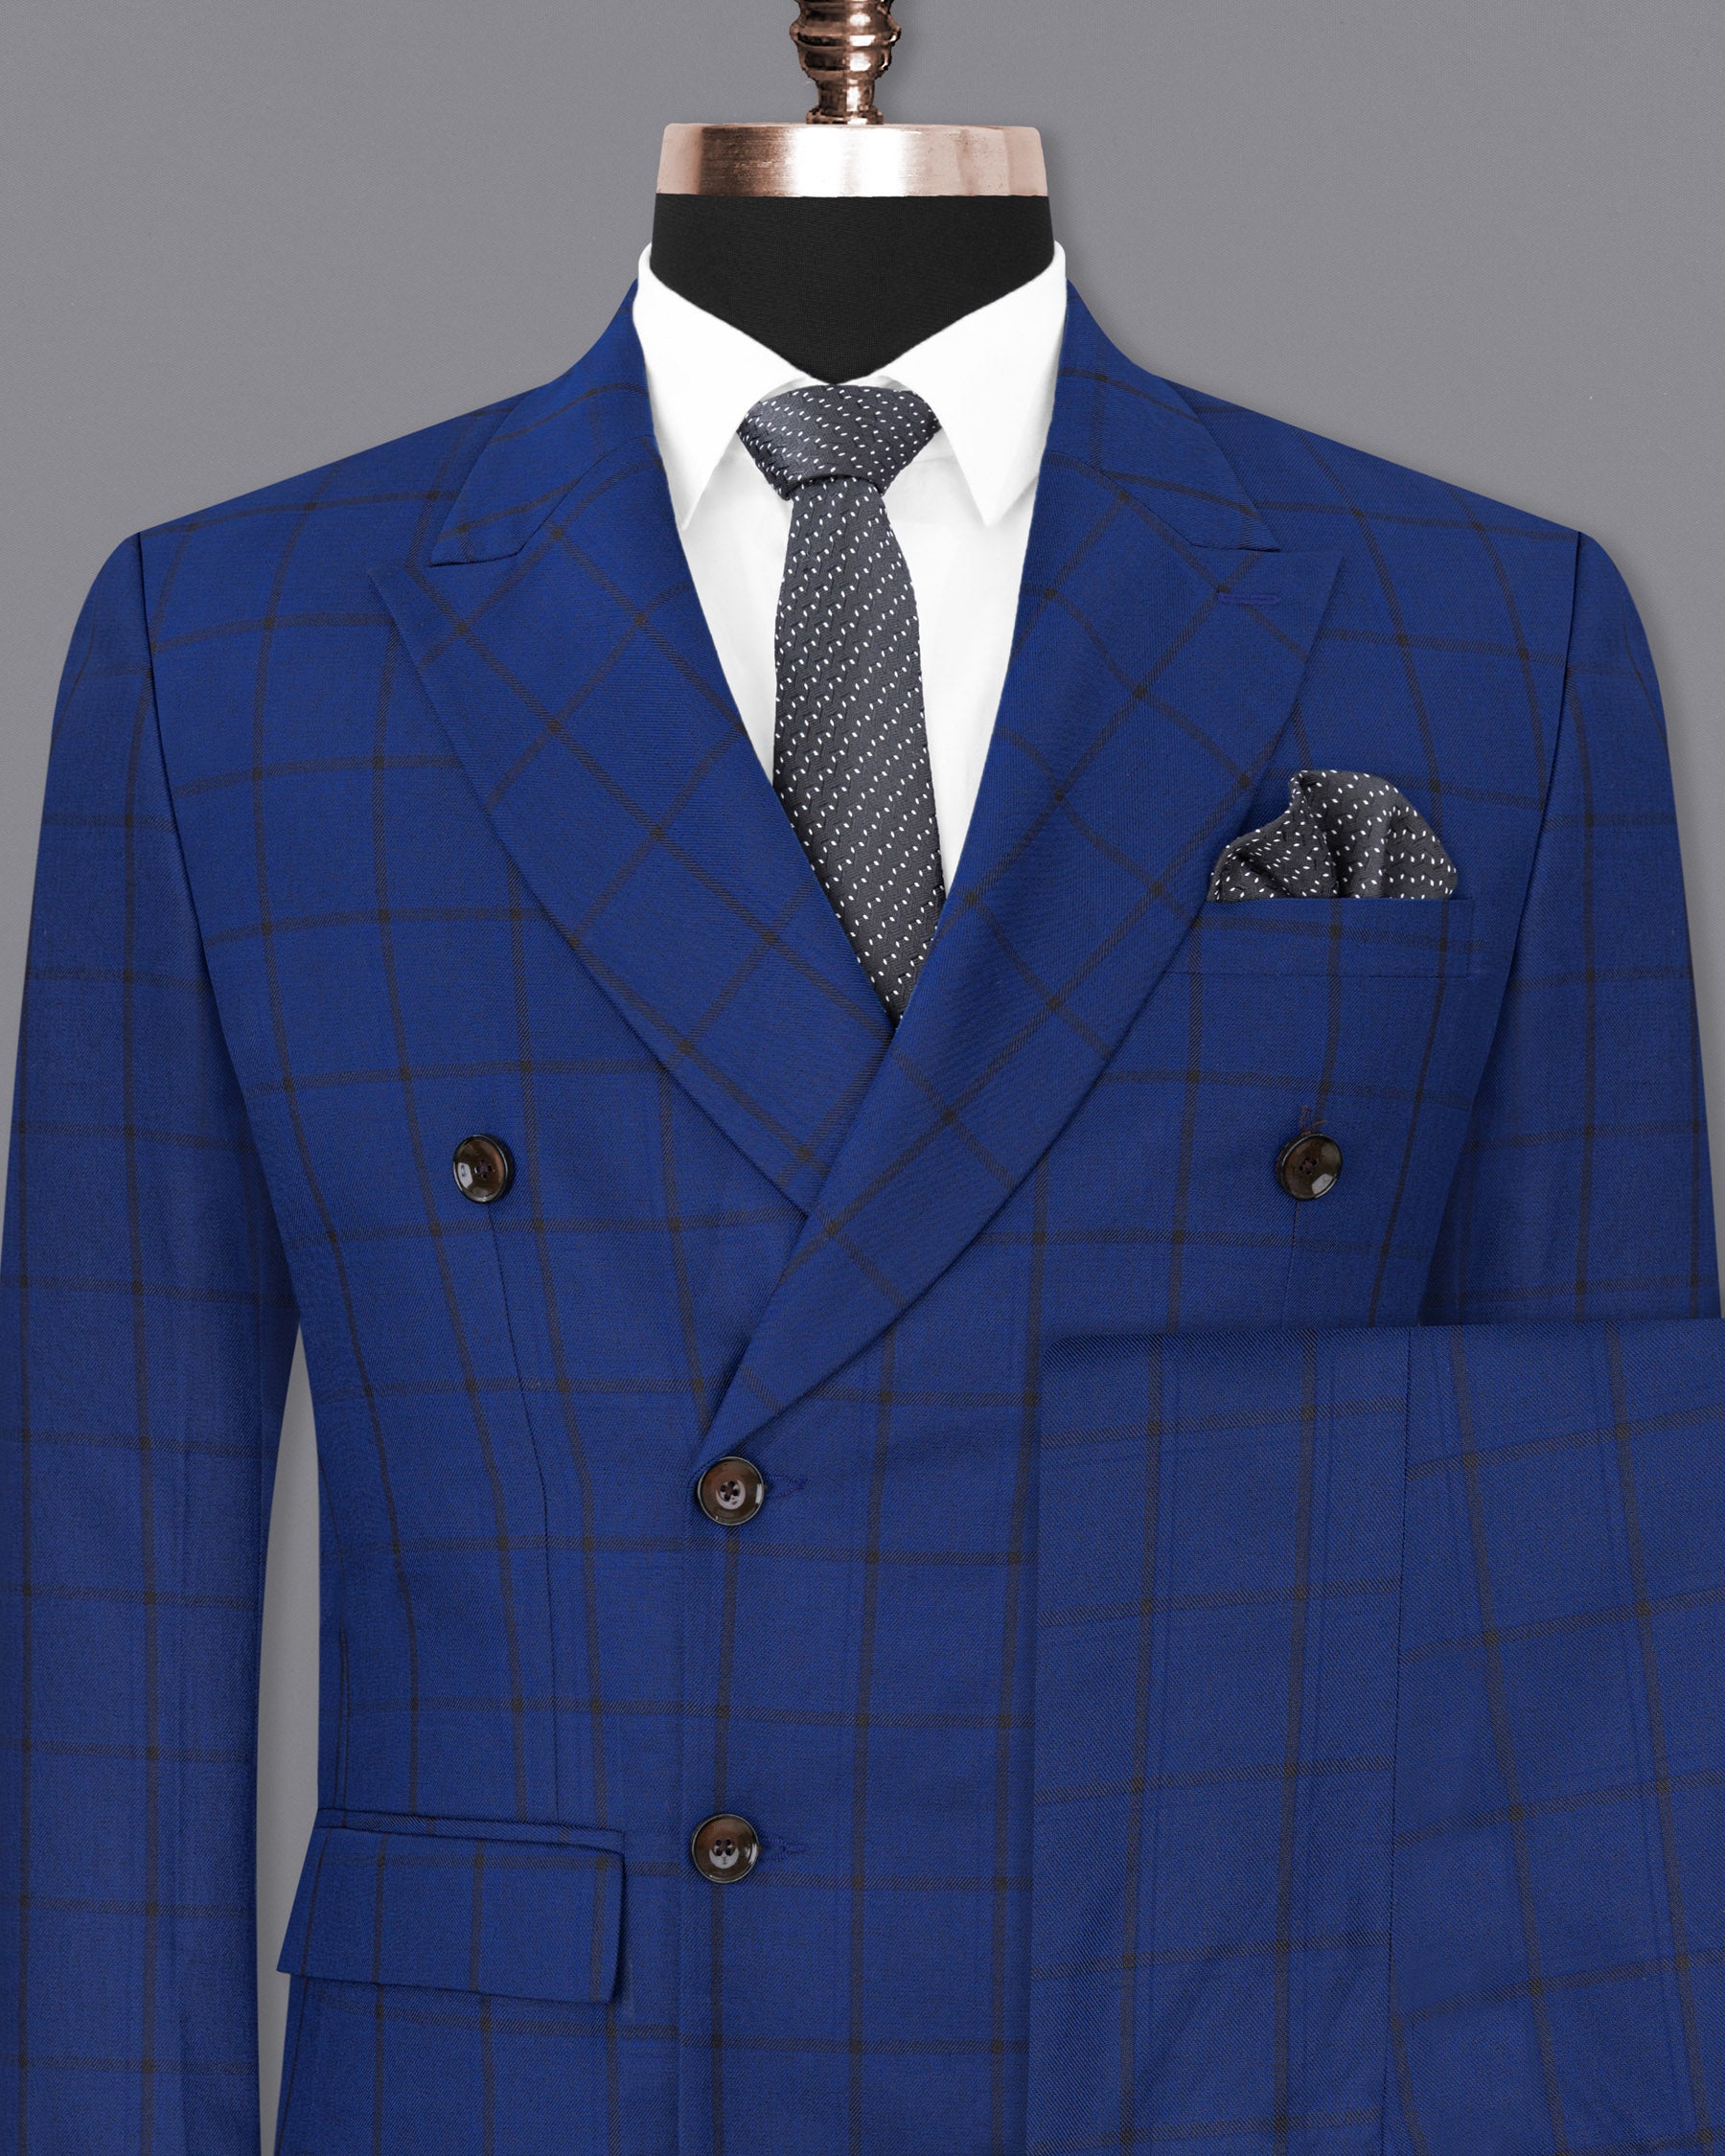 Deep Sapphire Windowpane Double Breasted Suit ST1721-DB-36, ST1721-DB-38, ST1721-DB-40, ST1721-DB-42, ST1721-DB-44, ST1721-DB-46, ST1721-DB-48, ST1721-DB-50, ST1721-DB-52, ST1721-DB-54, ST1721-DB-56, ST1721-DB-58, ST1721-DB-60